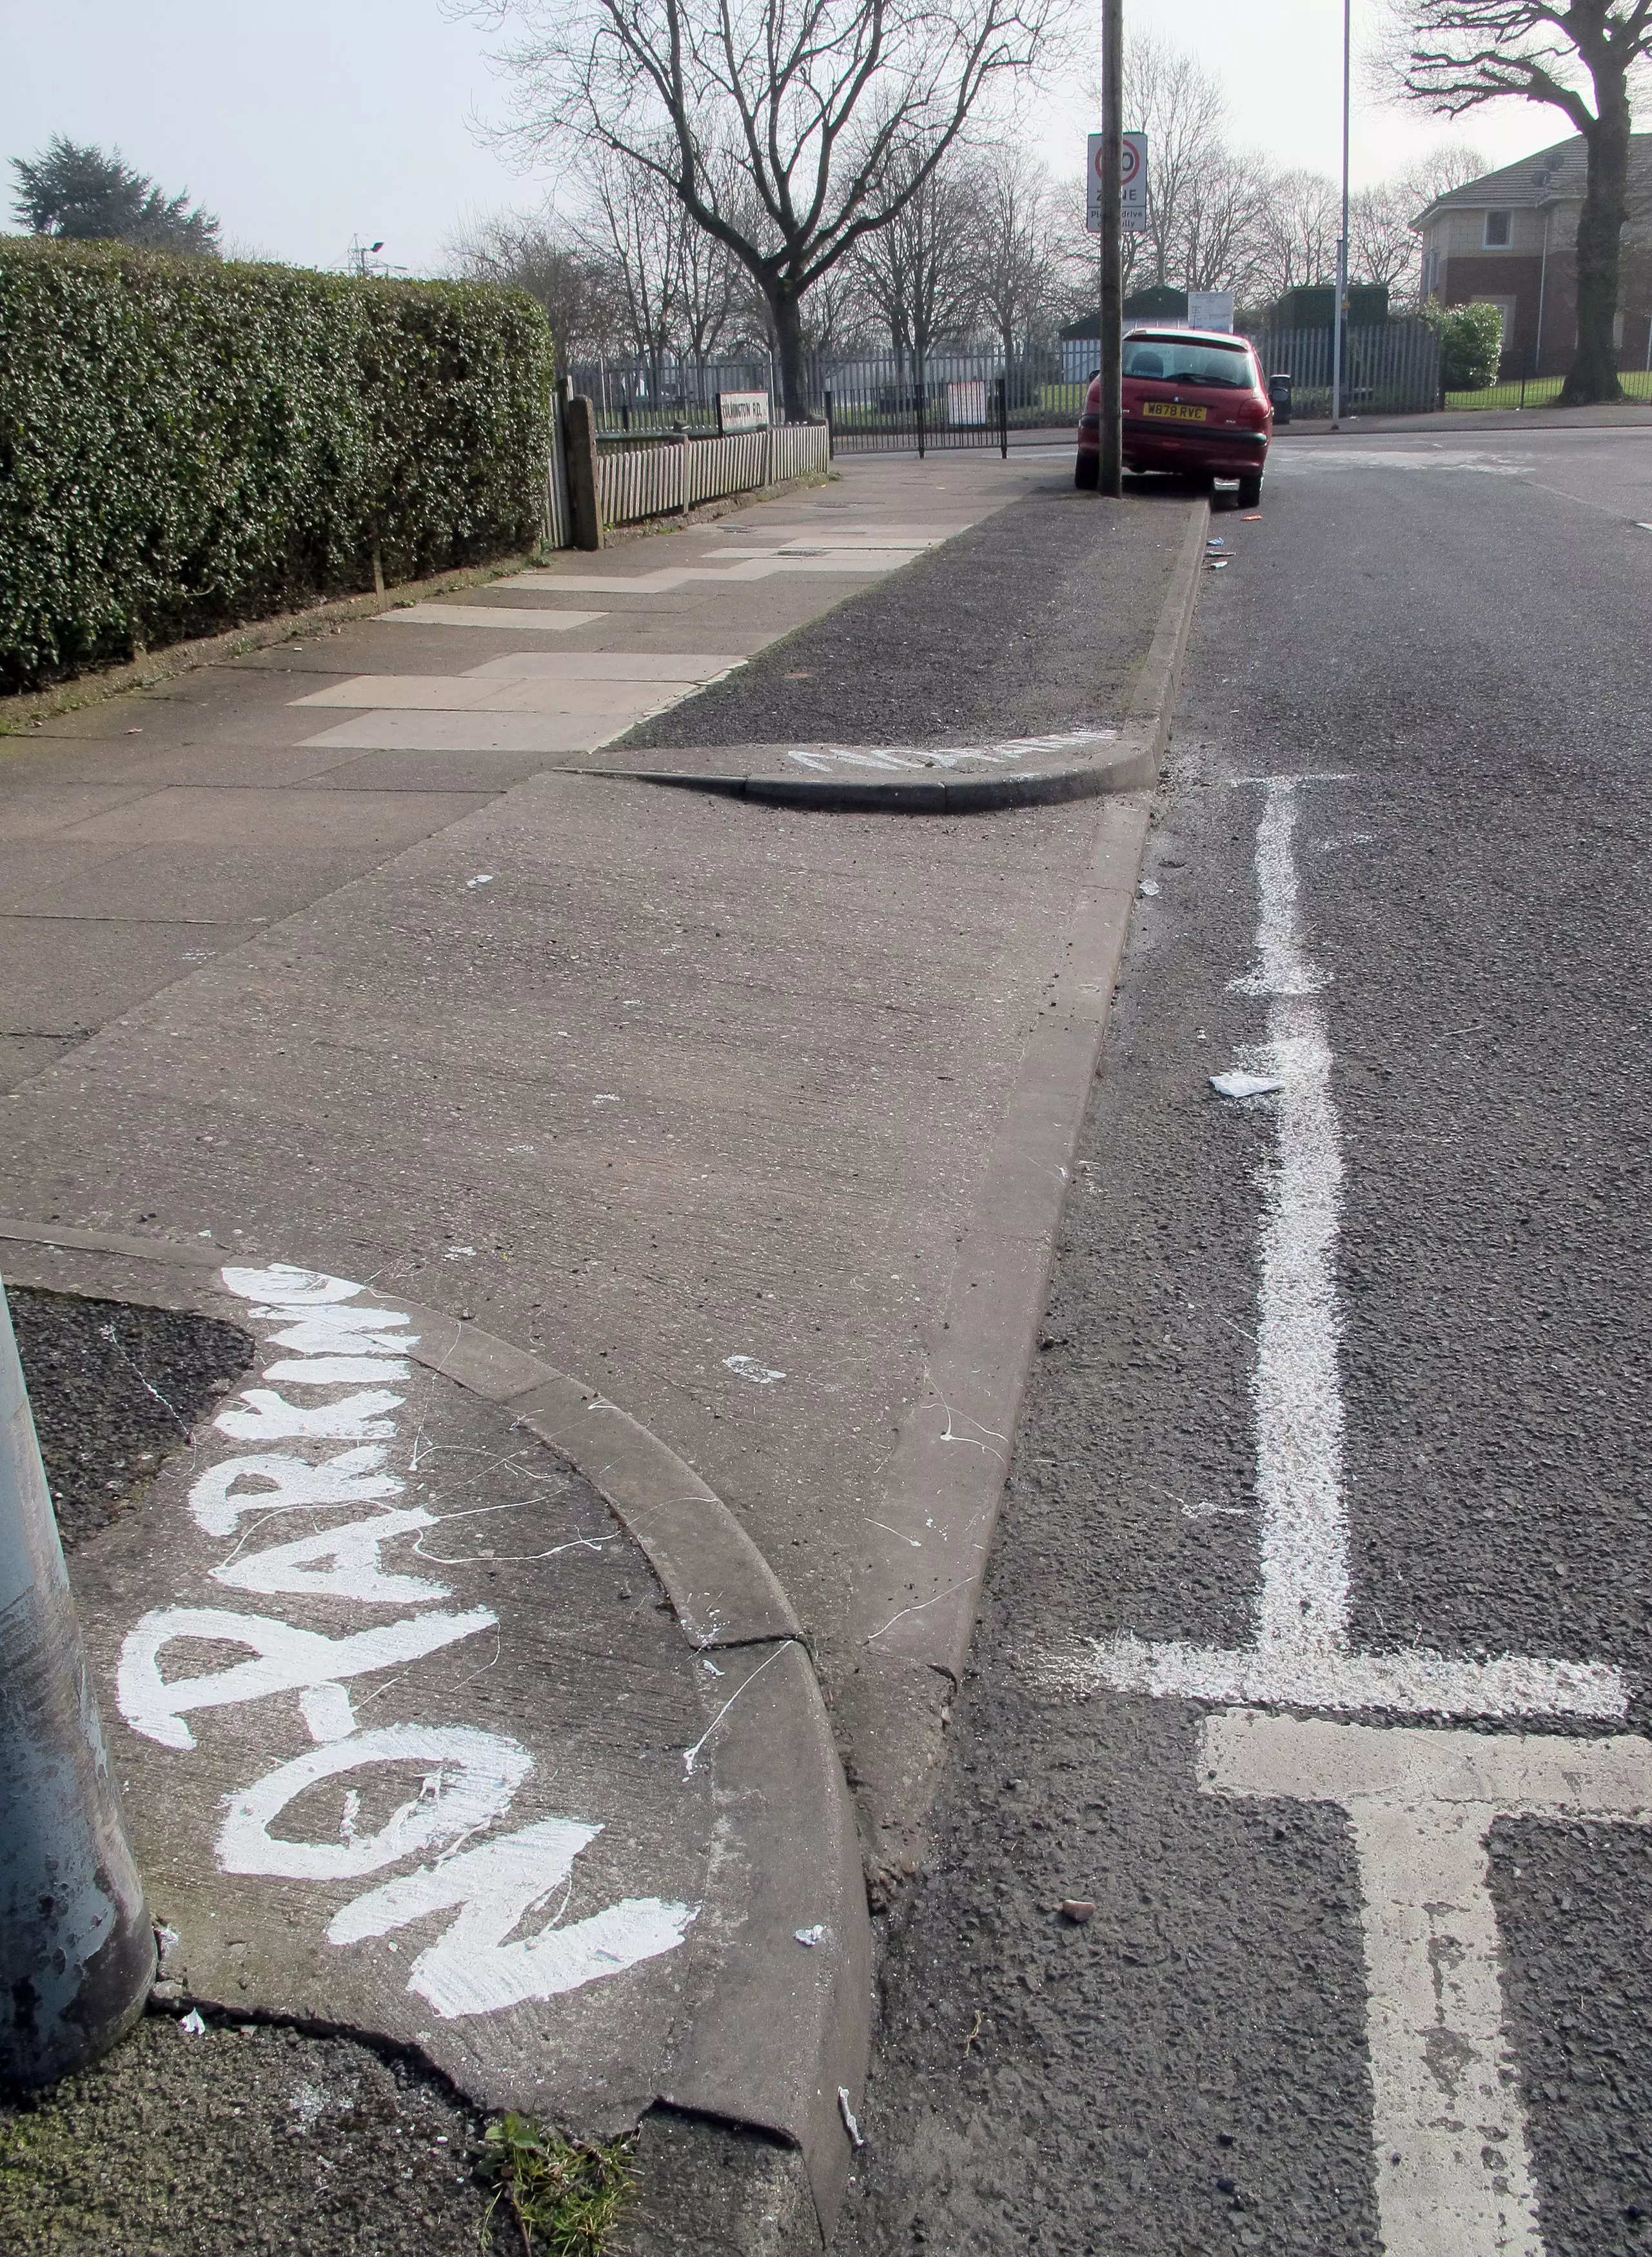 Transport Secretary Grant Shapps said a new consultation will discuss a nationwide ban on pavement parking.